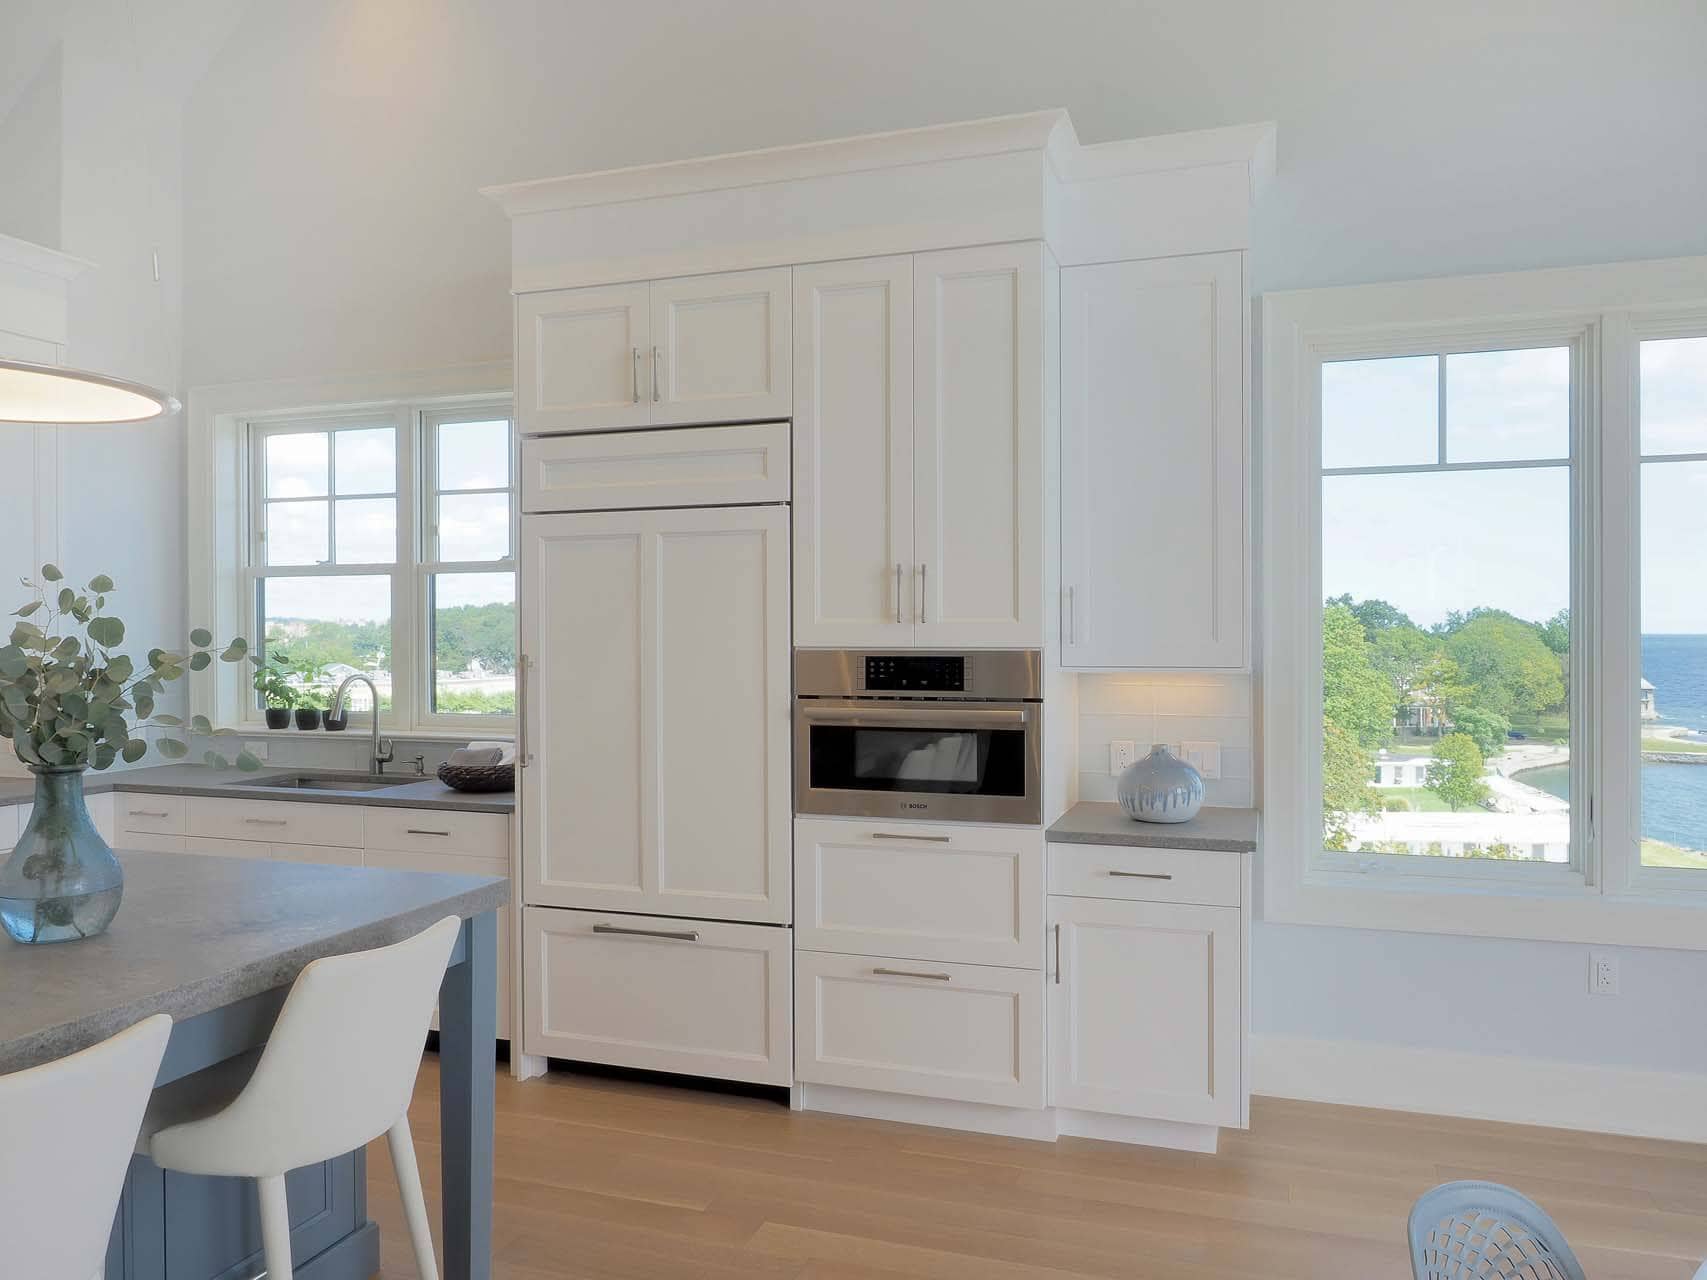 Luxury beachfront condo features oversized windows, pale oak flooring and white and blue-painted Bilotta cabinetry.